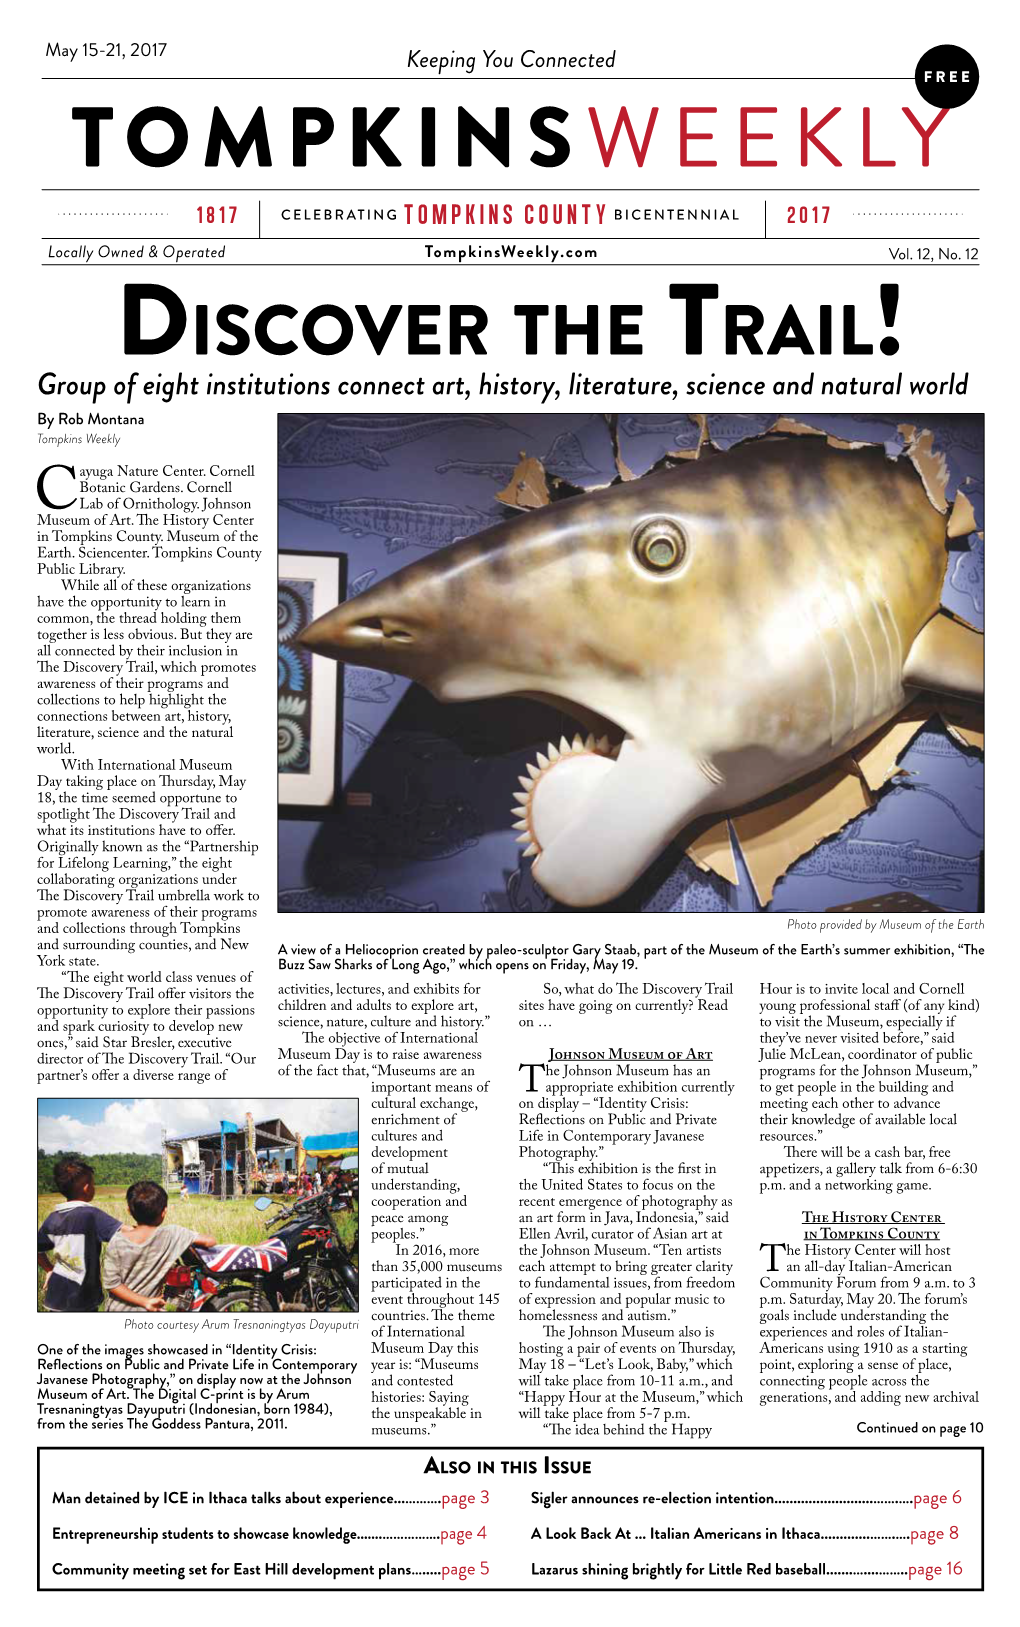 Discover the Trail! Group of Eight Institutions Connect Art, History, Literature, Science and Natural World by Rob Montana Tompkins Weekly